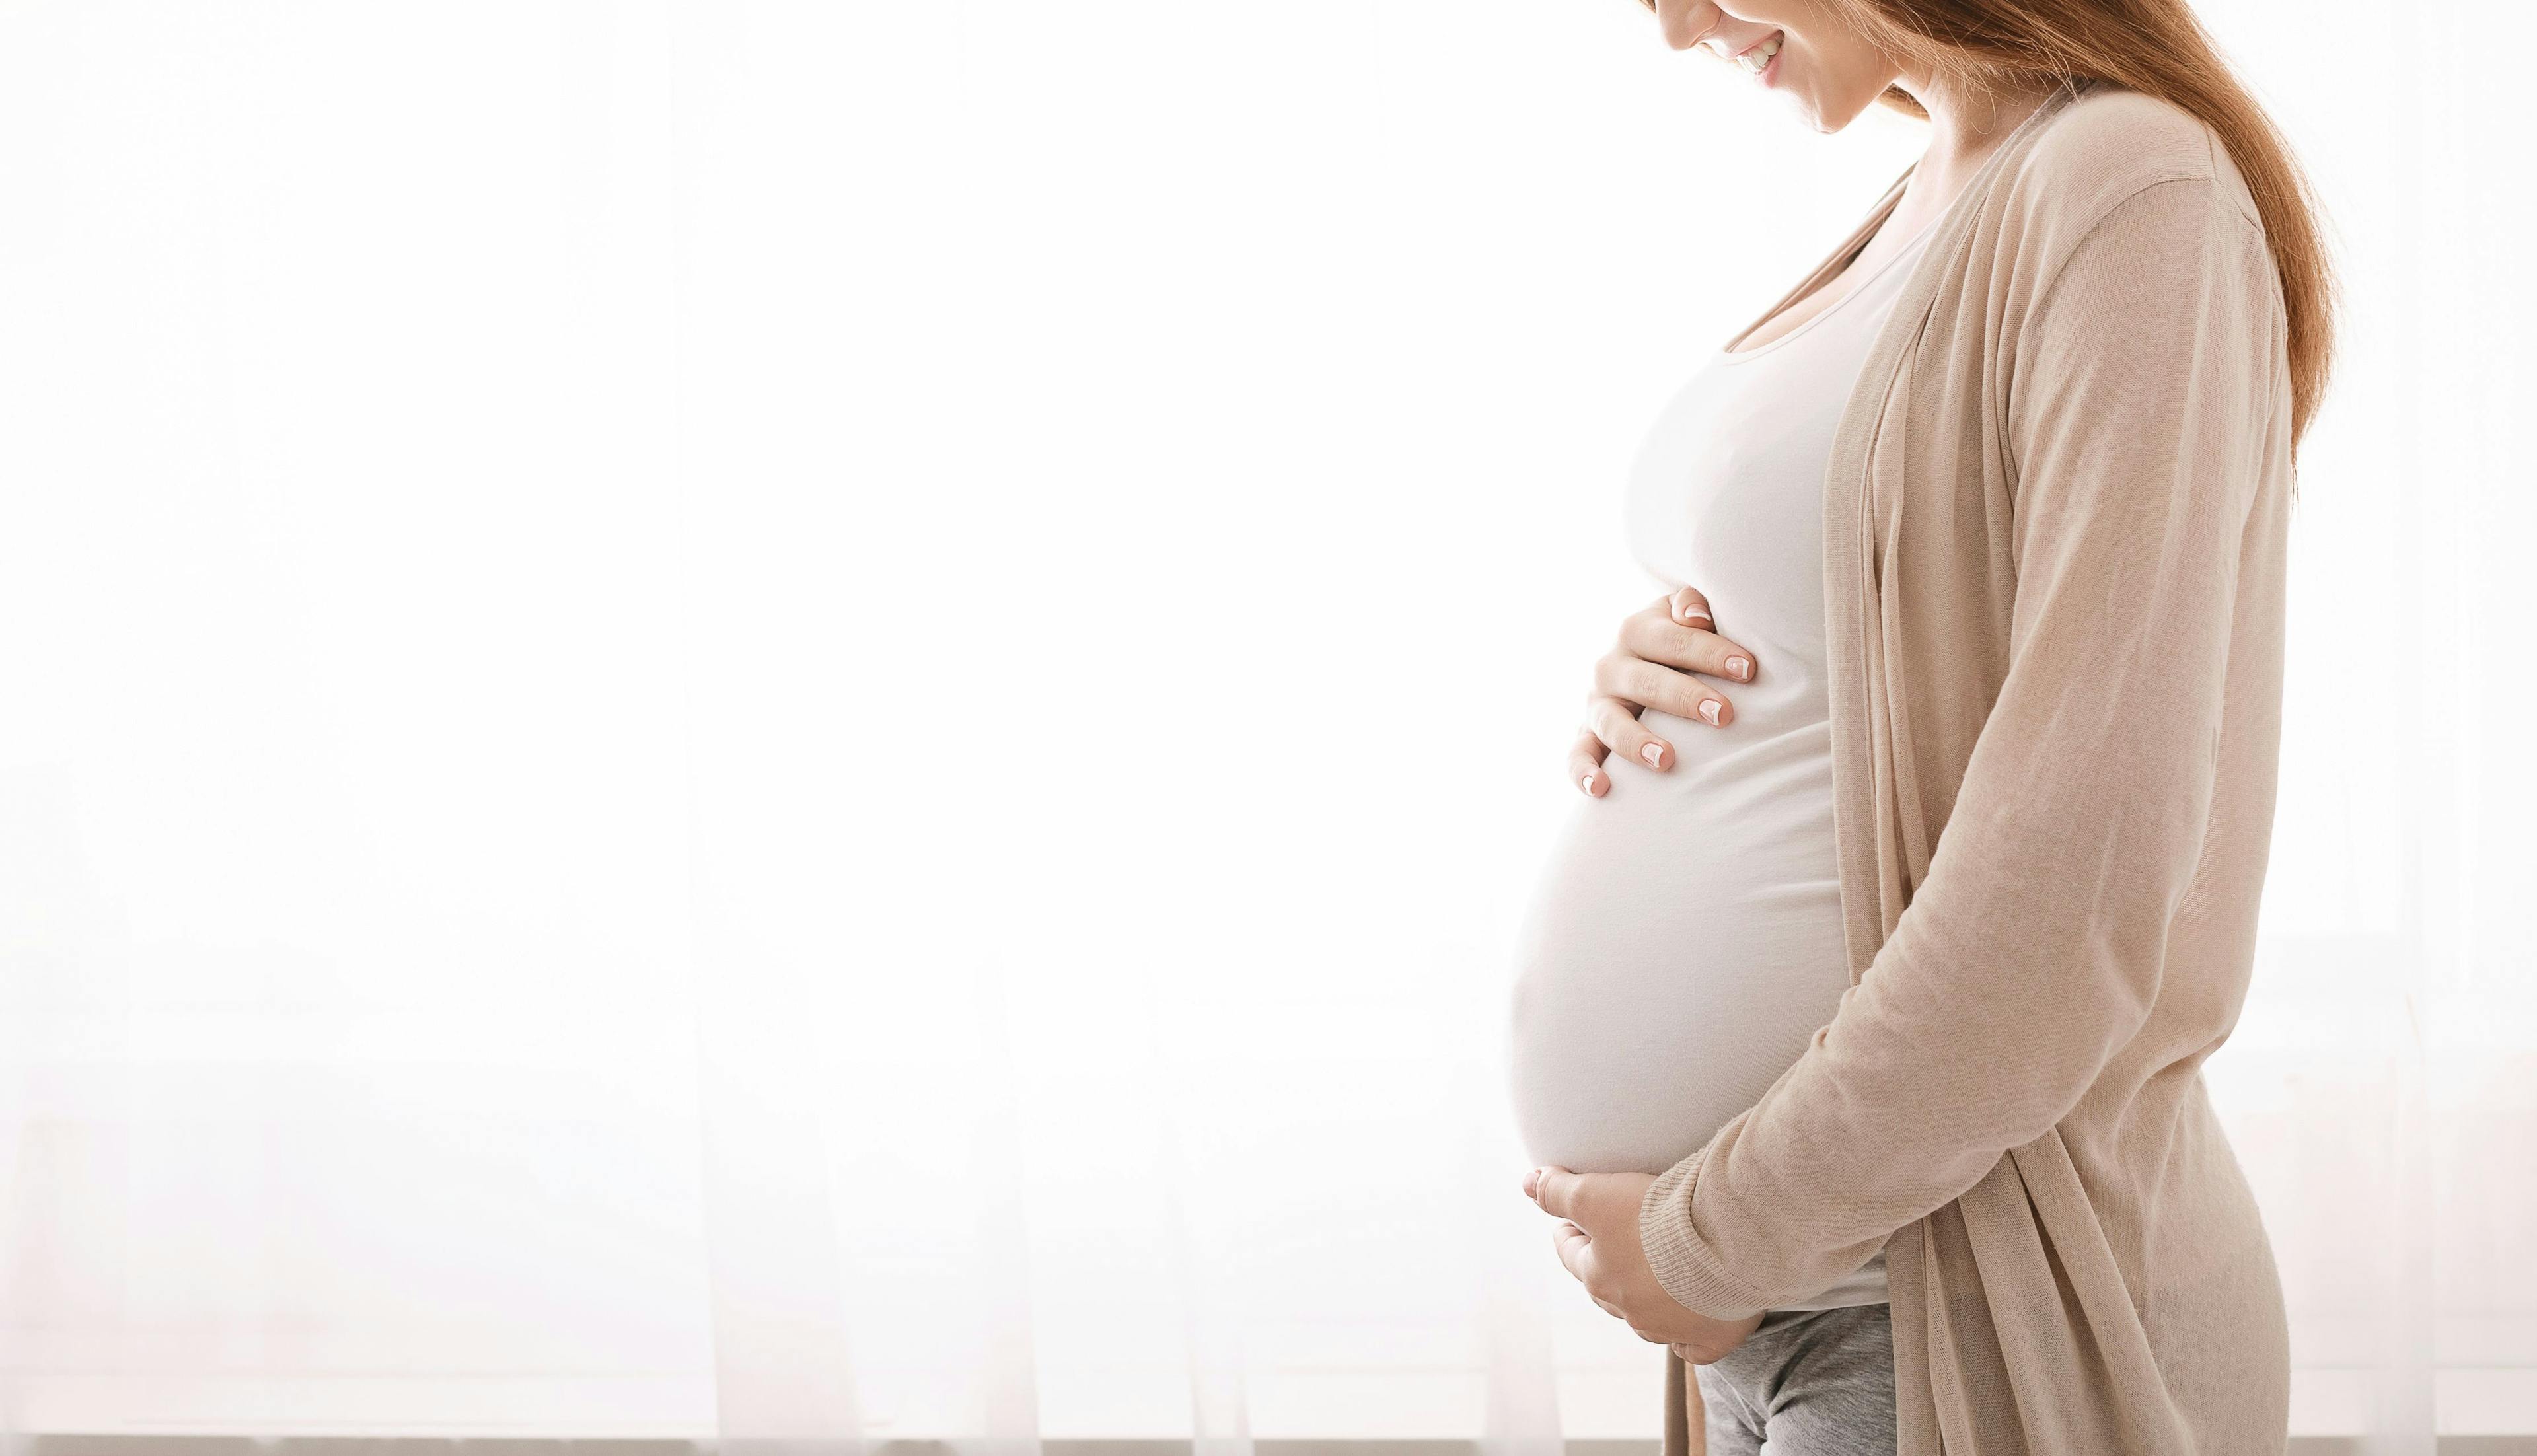 Women With MS Experience Improvements in Their Disease While Pregnant